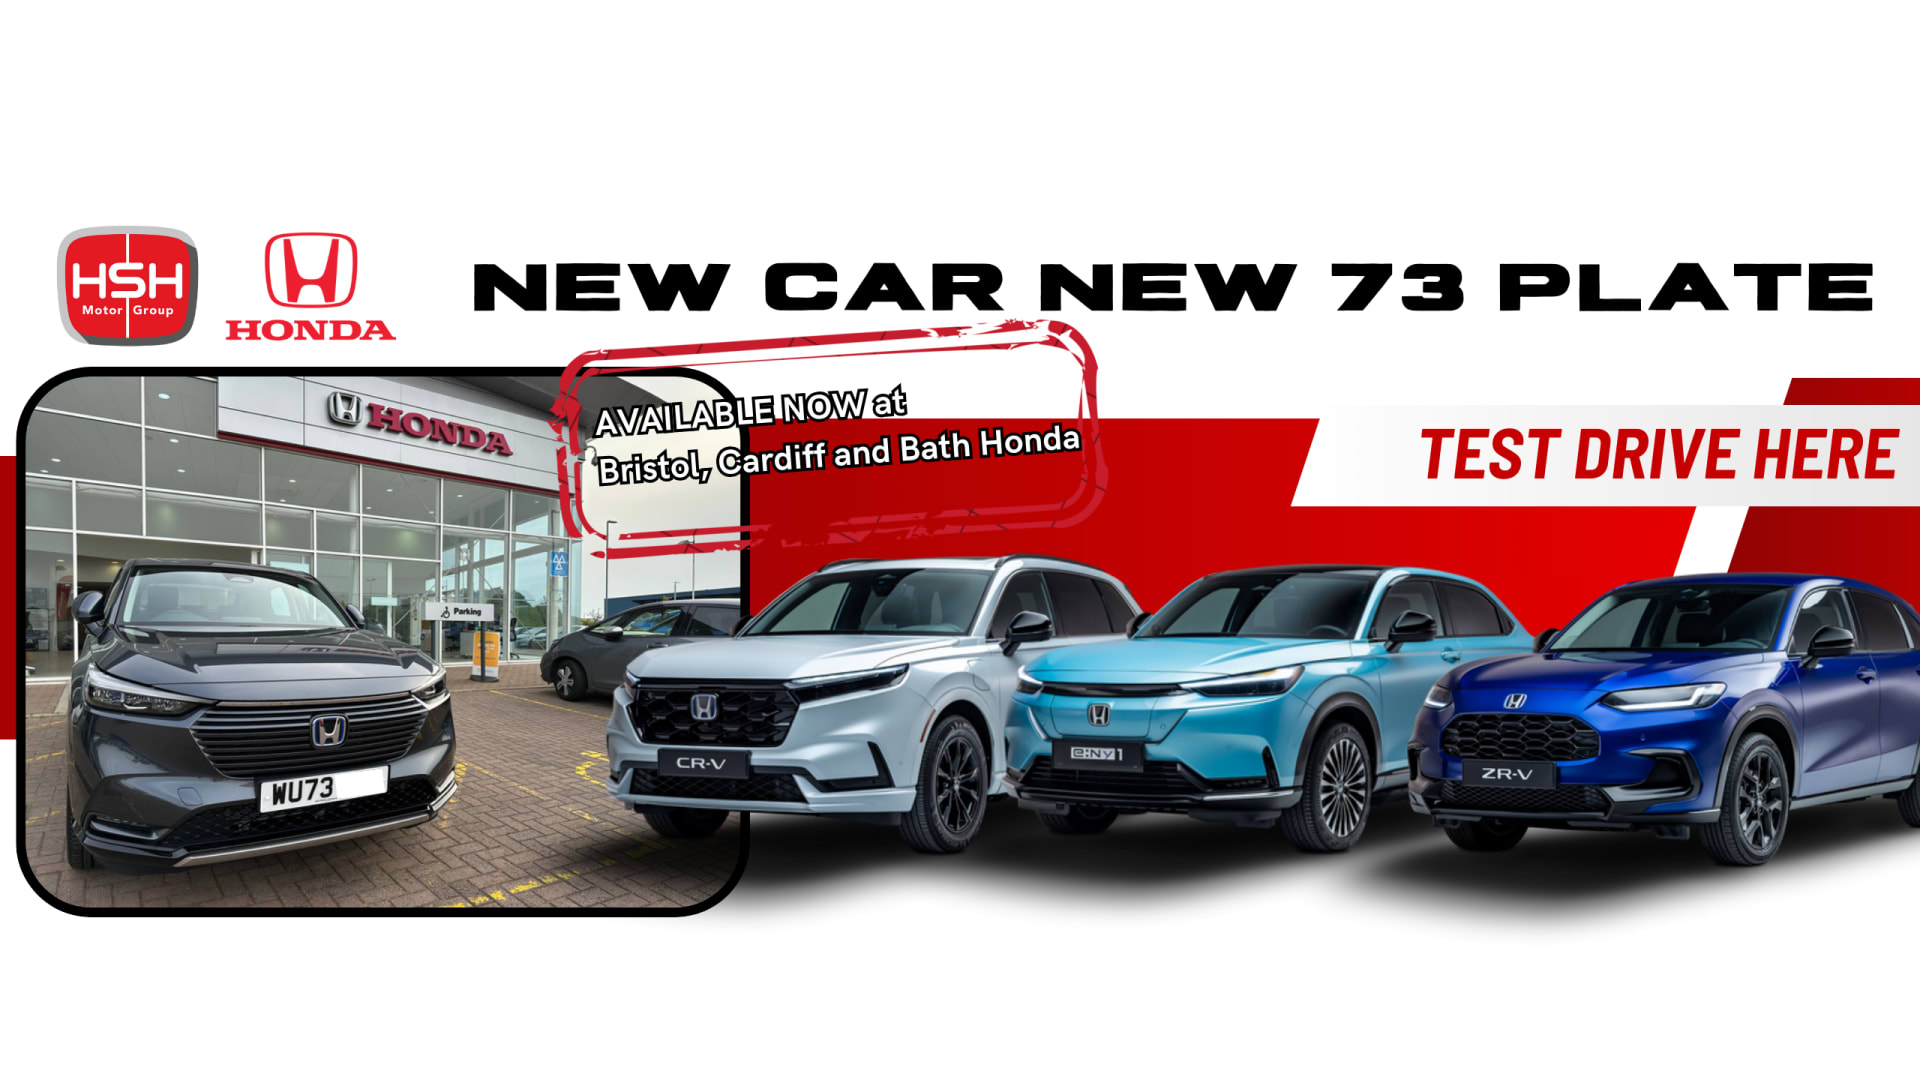 73 Plate is now available